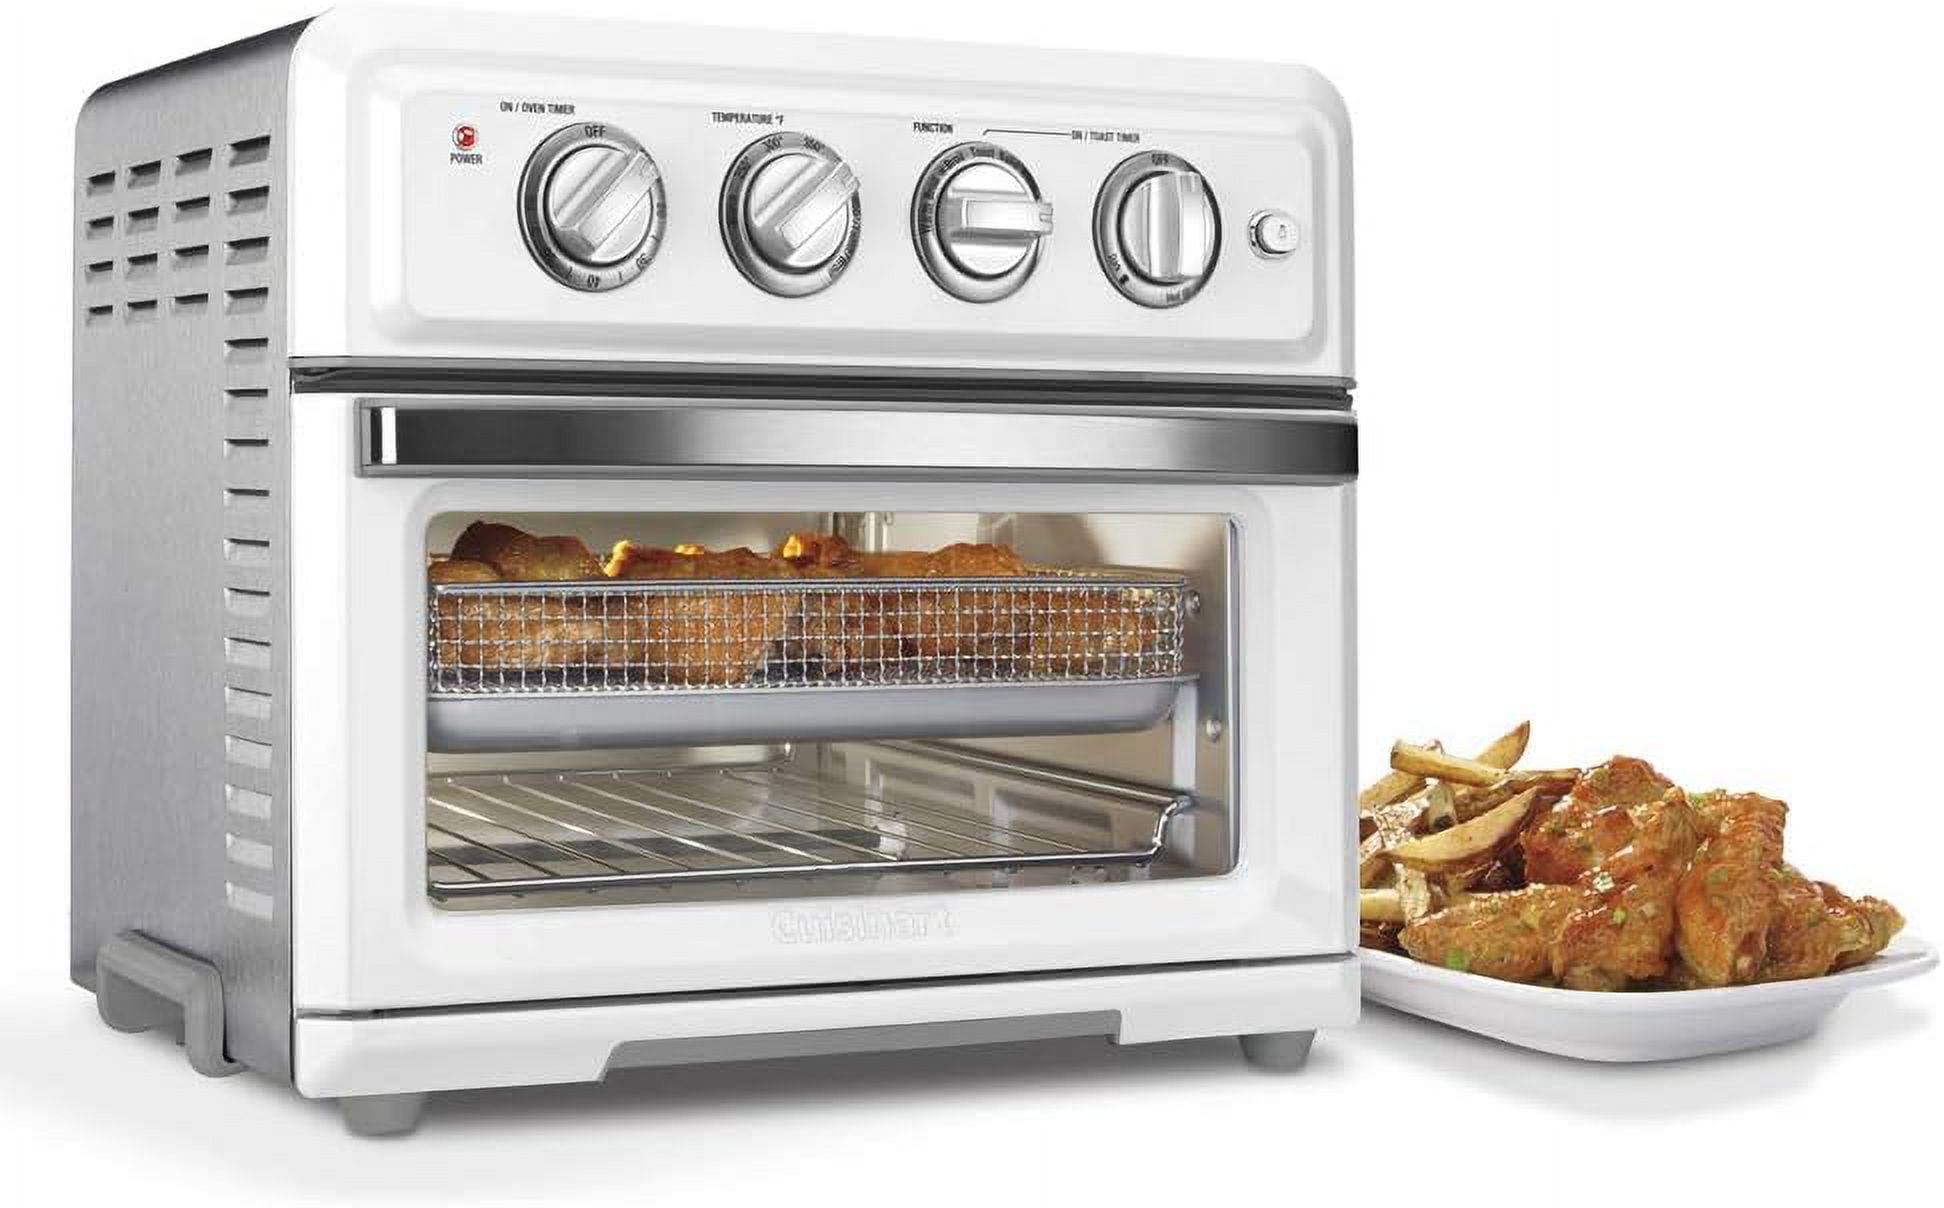 Cuisinart TOA-60TG Stainless Steel AirFryer Toaster/Convection Oven